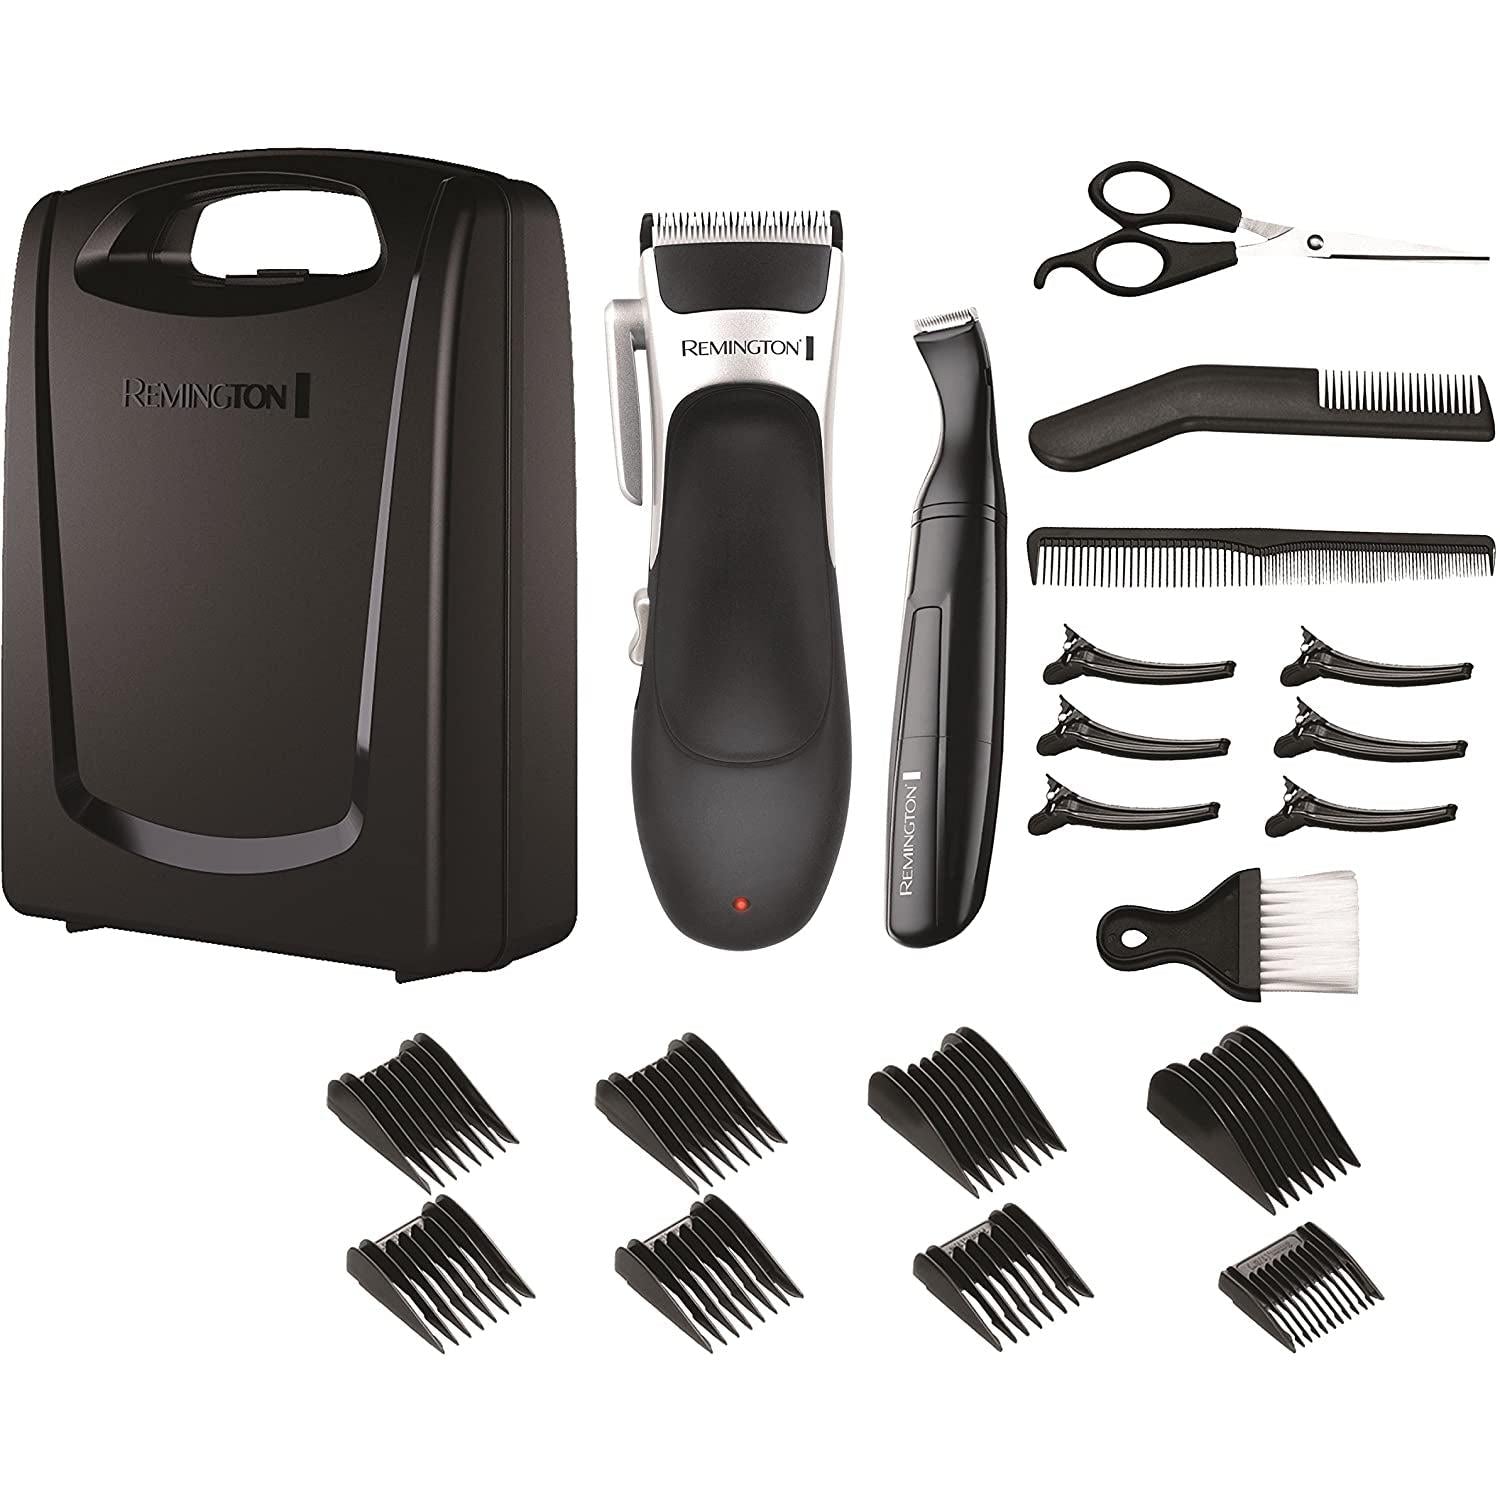 Remington Stylist Hair Clippers, Cordless Use with 8 Comb Lengths and Detail Trimmer, 25 Piece Grooming Kit - HC366 - Healthxpress.ie